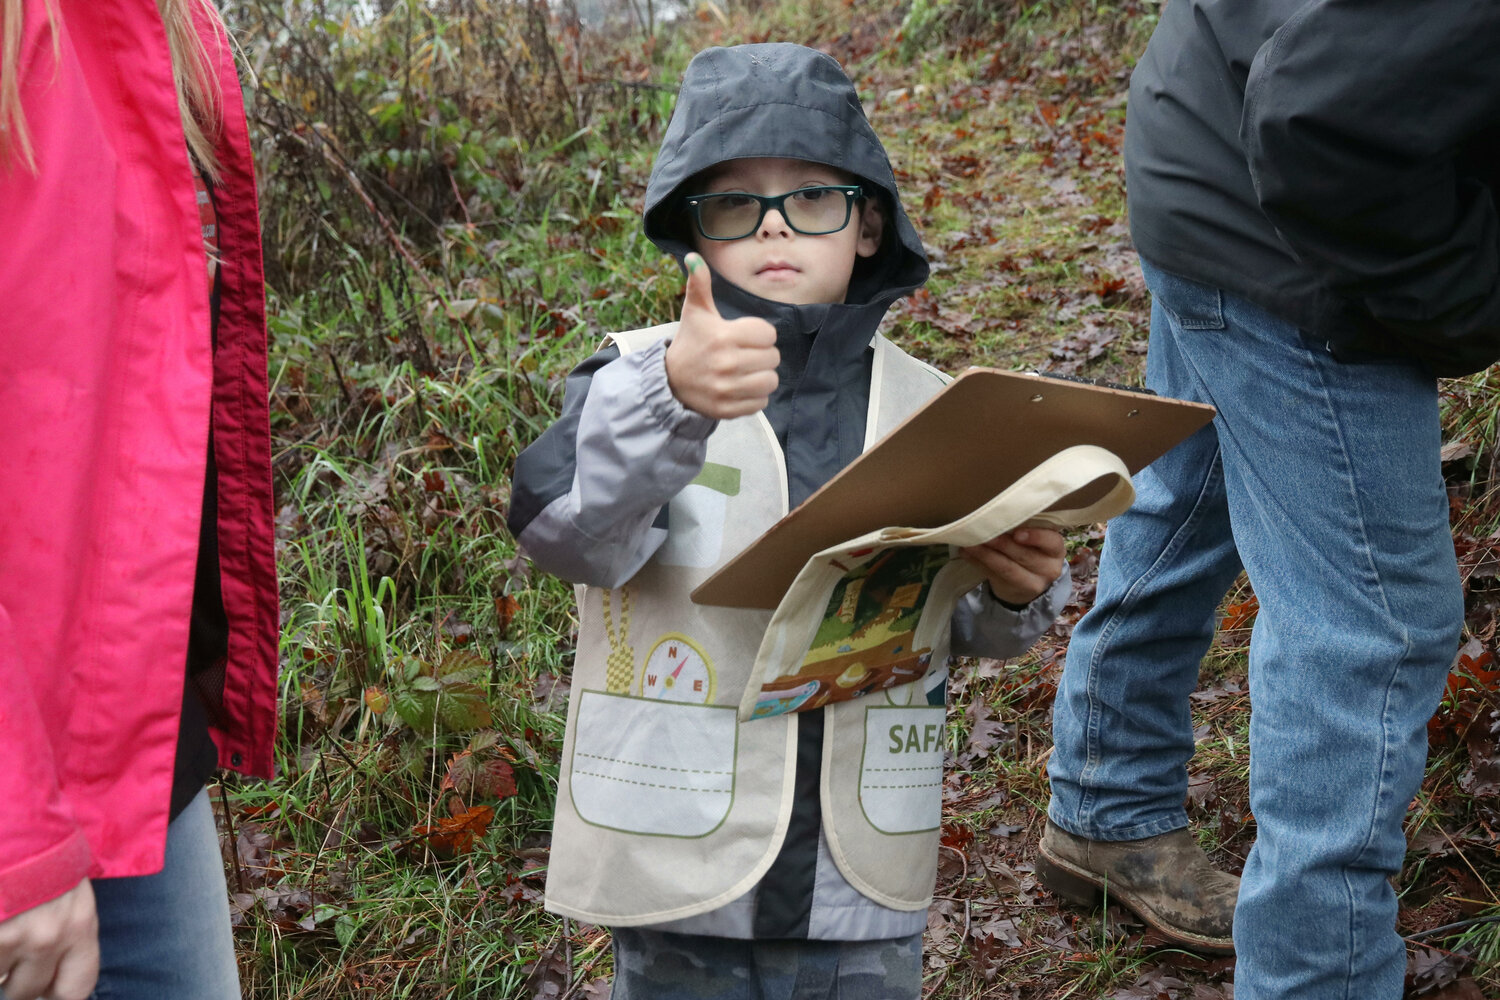 Owen, 5, gives a thumbs up to the camera during a nature hike at Sweet Tomatoes Learning Center in Chehalis on Wednesday, Dec. 6.